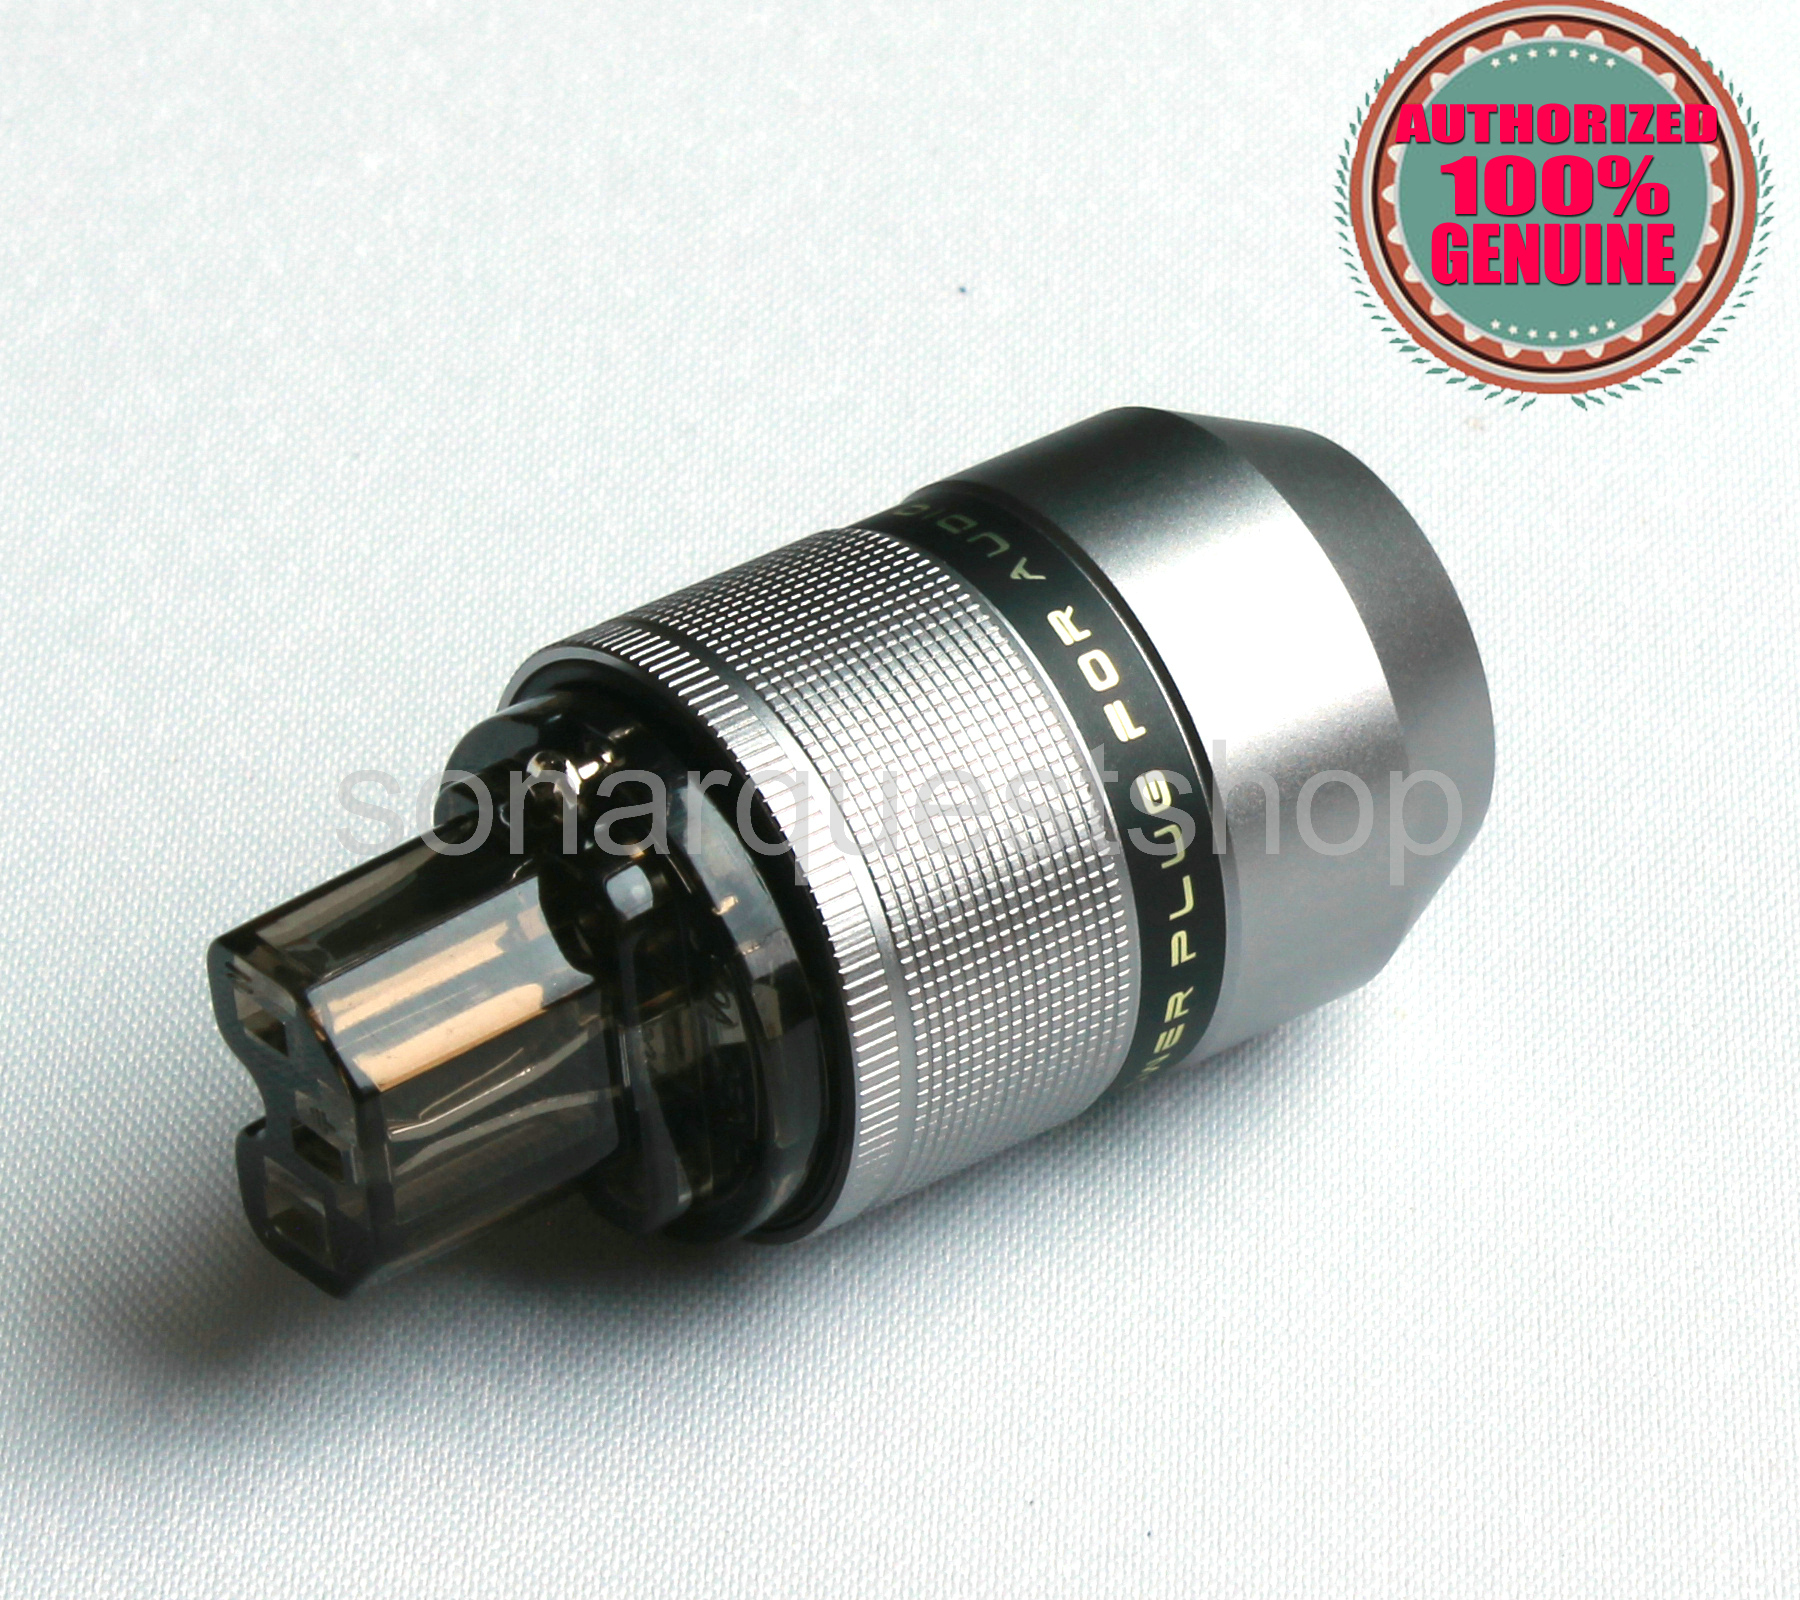 SONARQUEST PA-40F(R) Rhodium Plated Gray Special Aluminum alloy IEC Connector